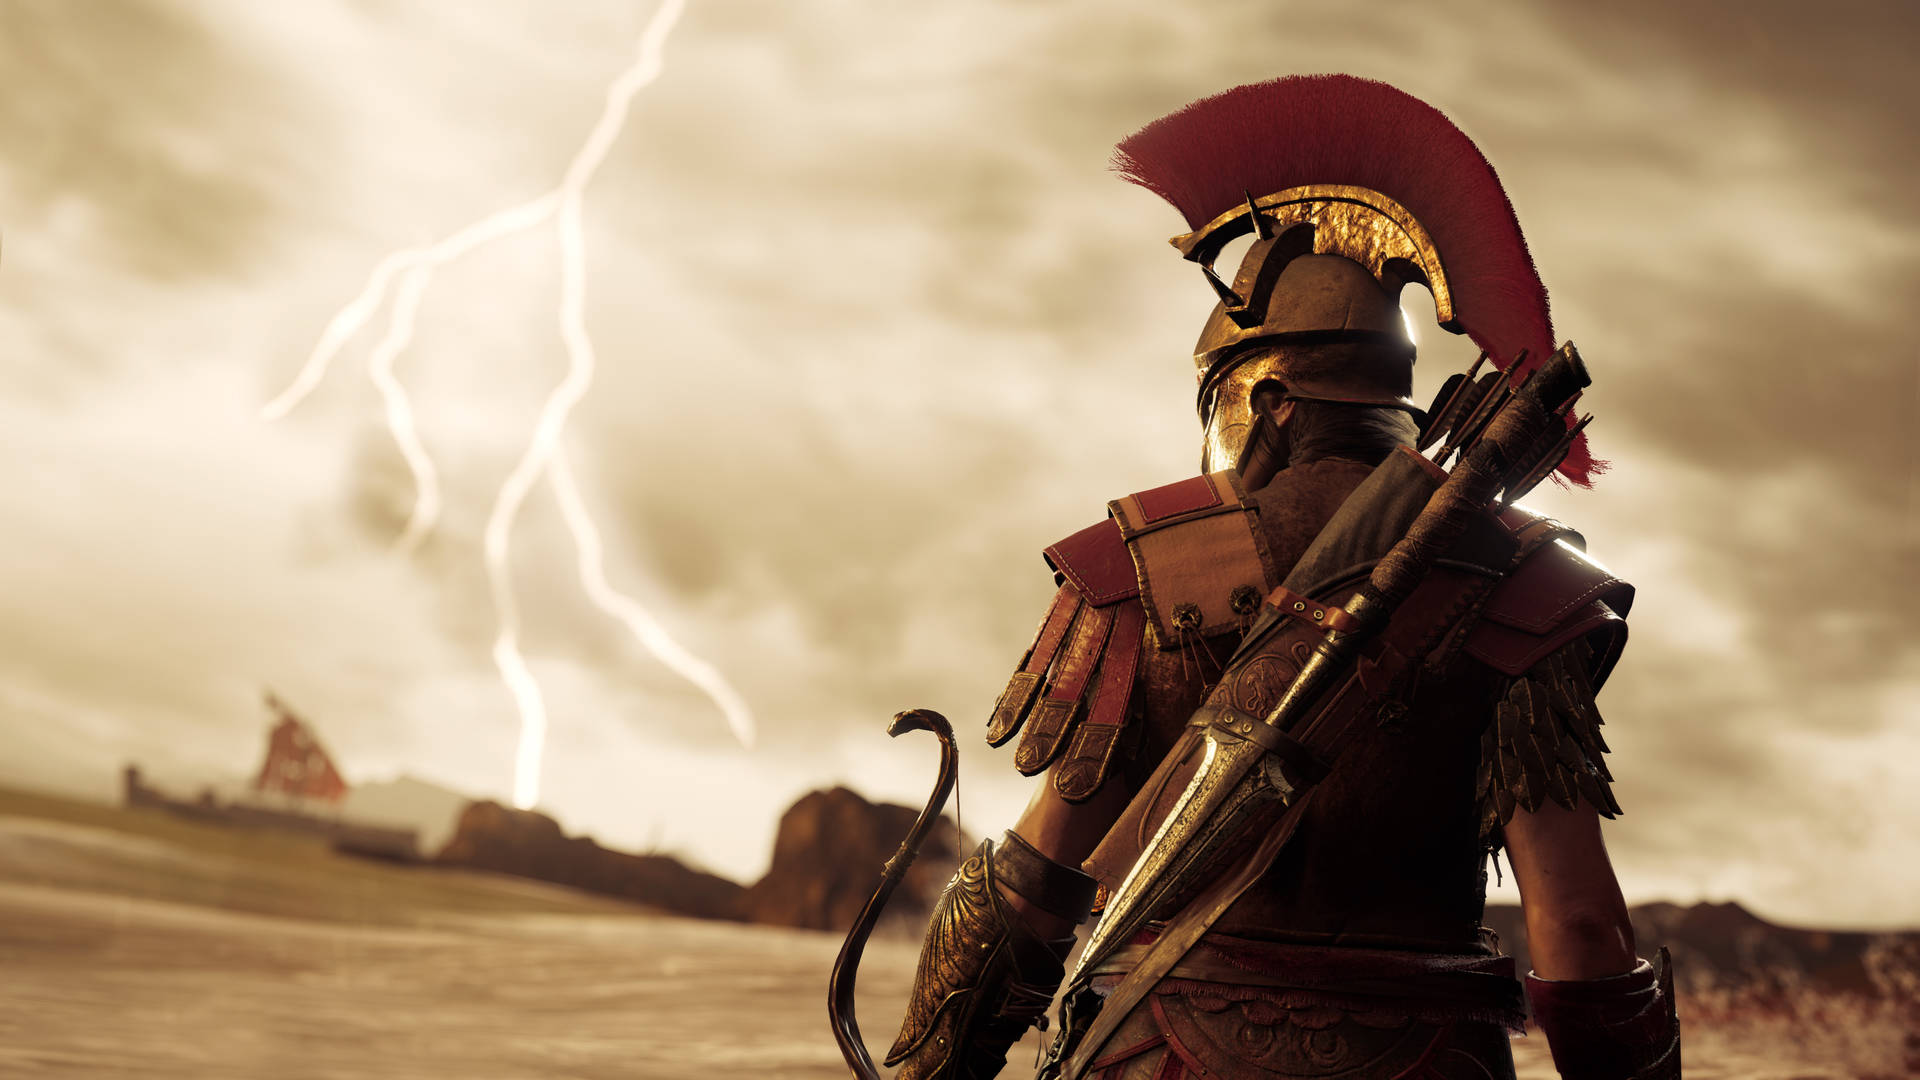 Alexios Of Assassin's Creed Odyssey Background